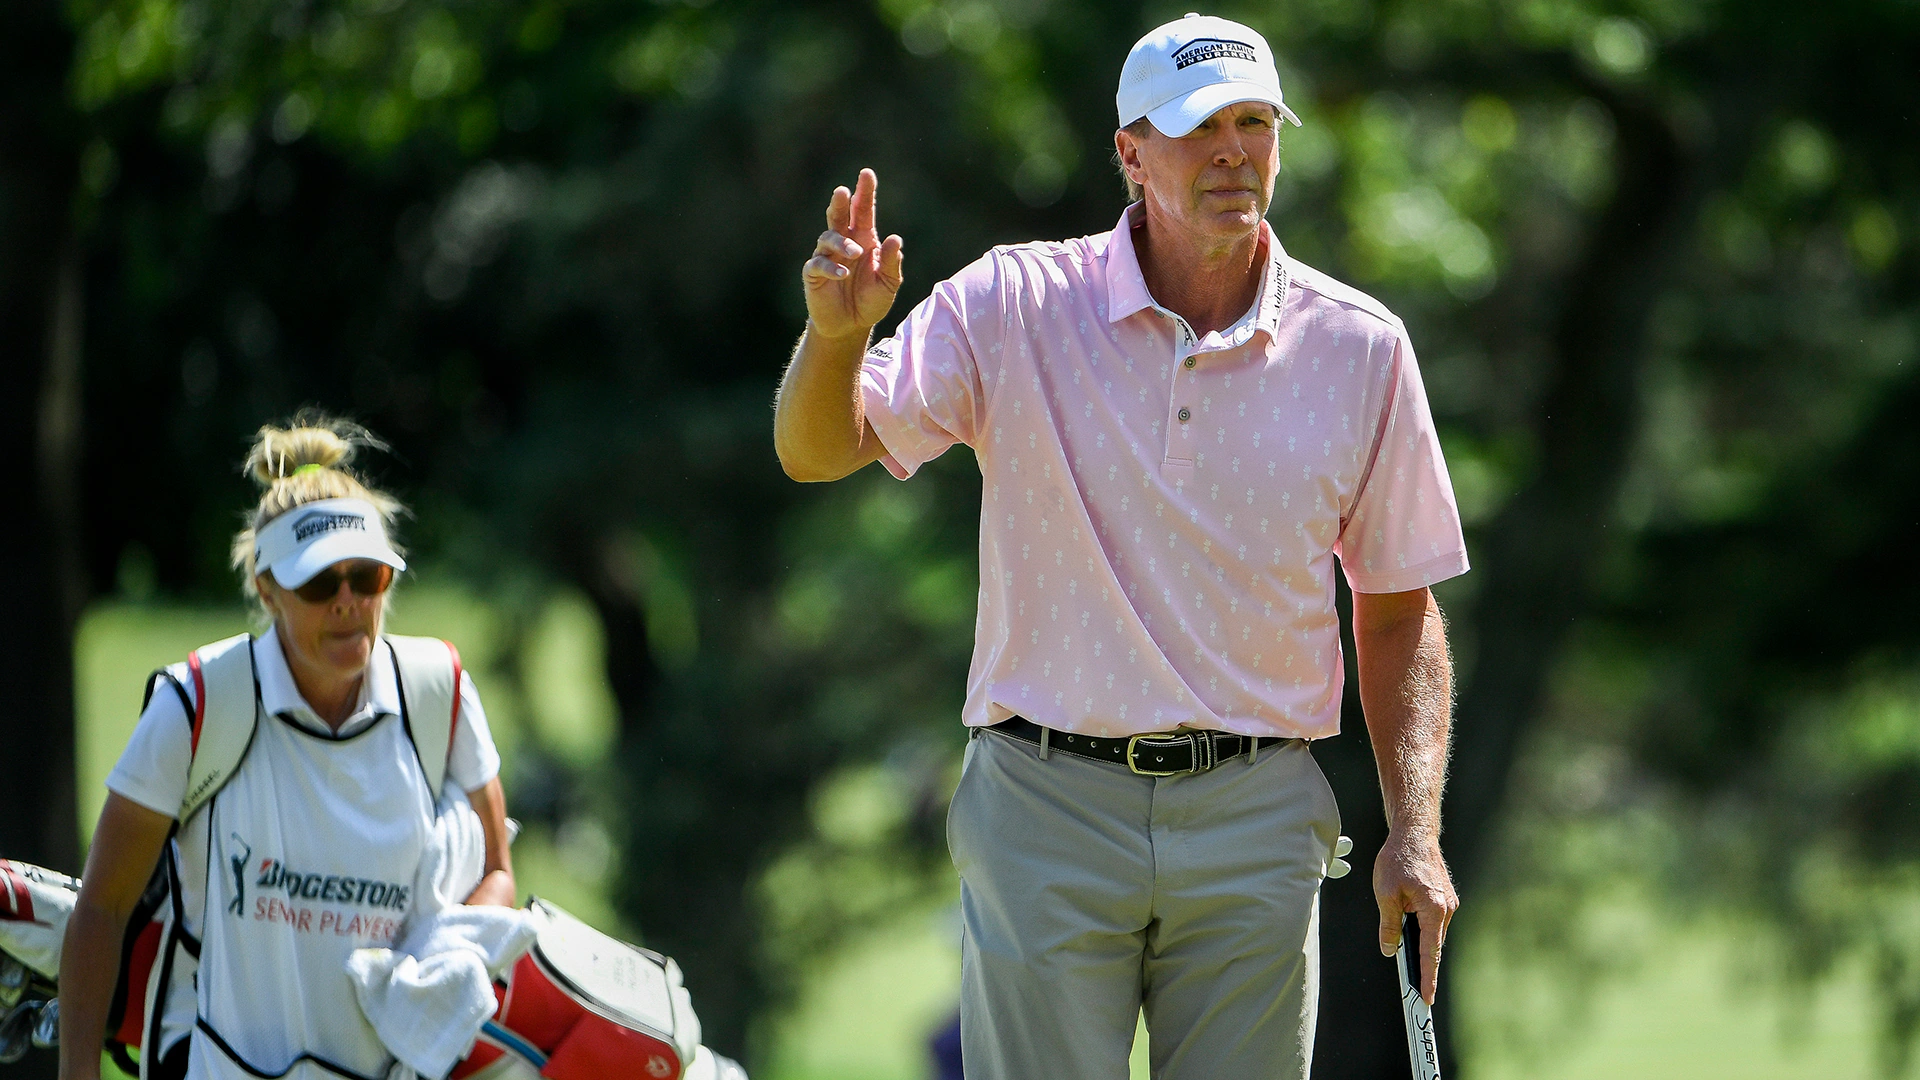 Steve Stricker set to return to play after illness, but ‘strength is still an issue’